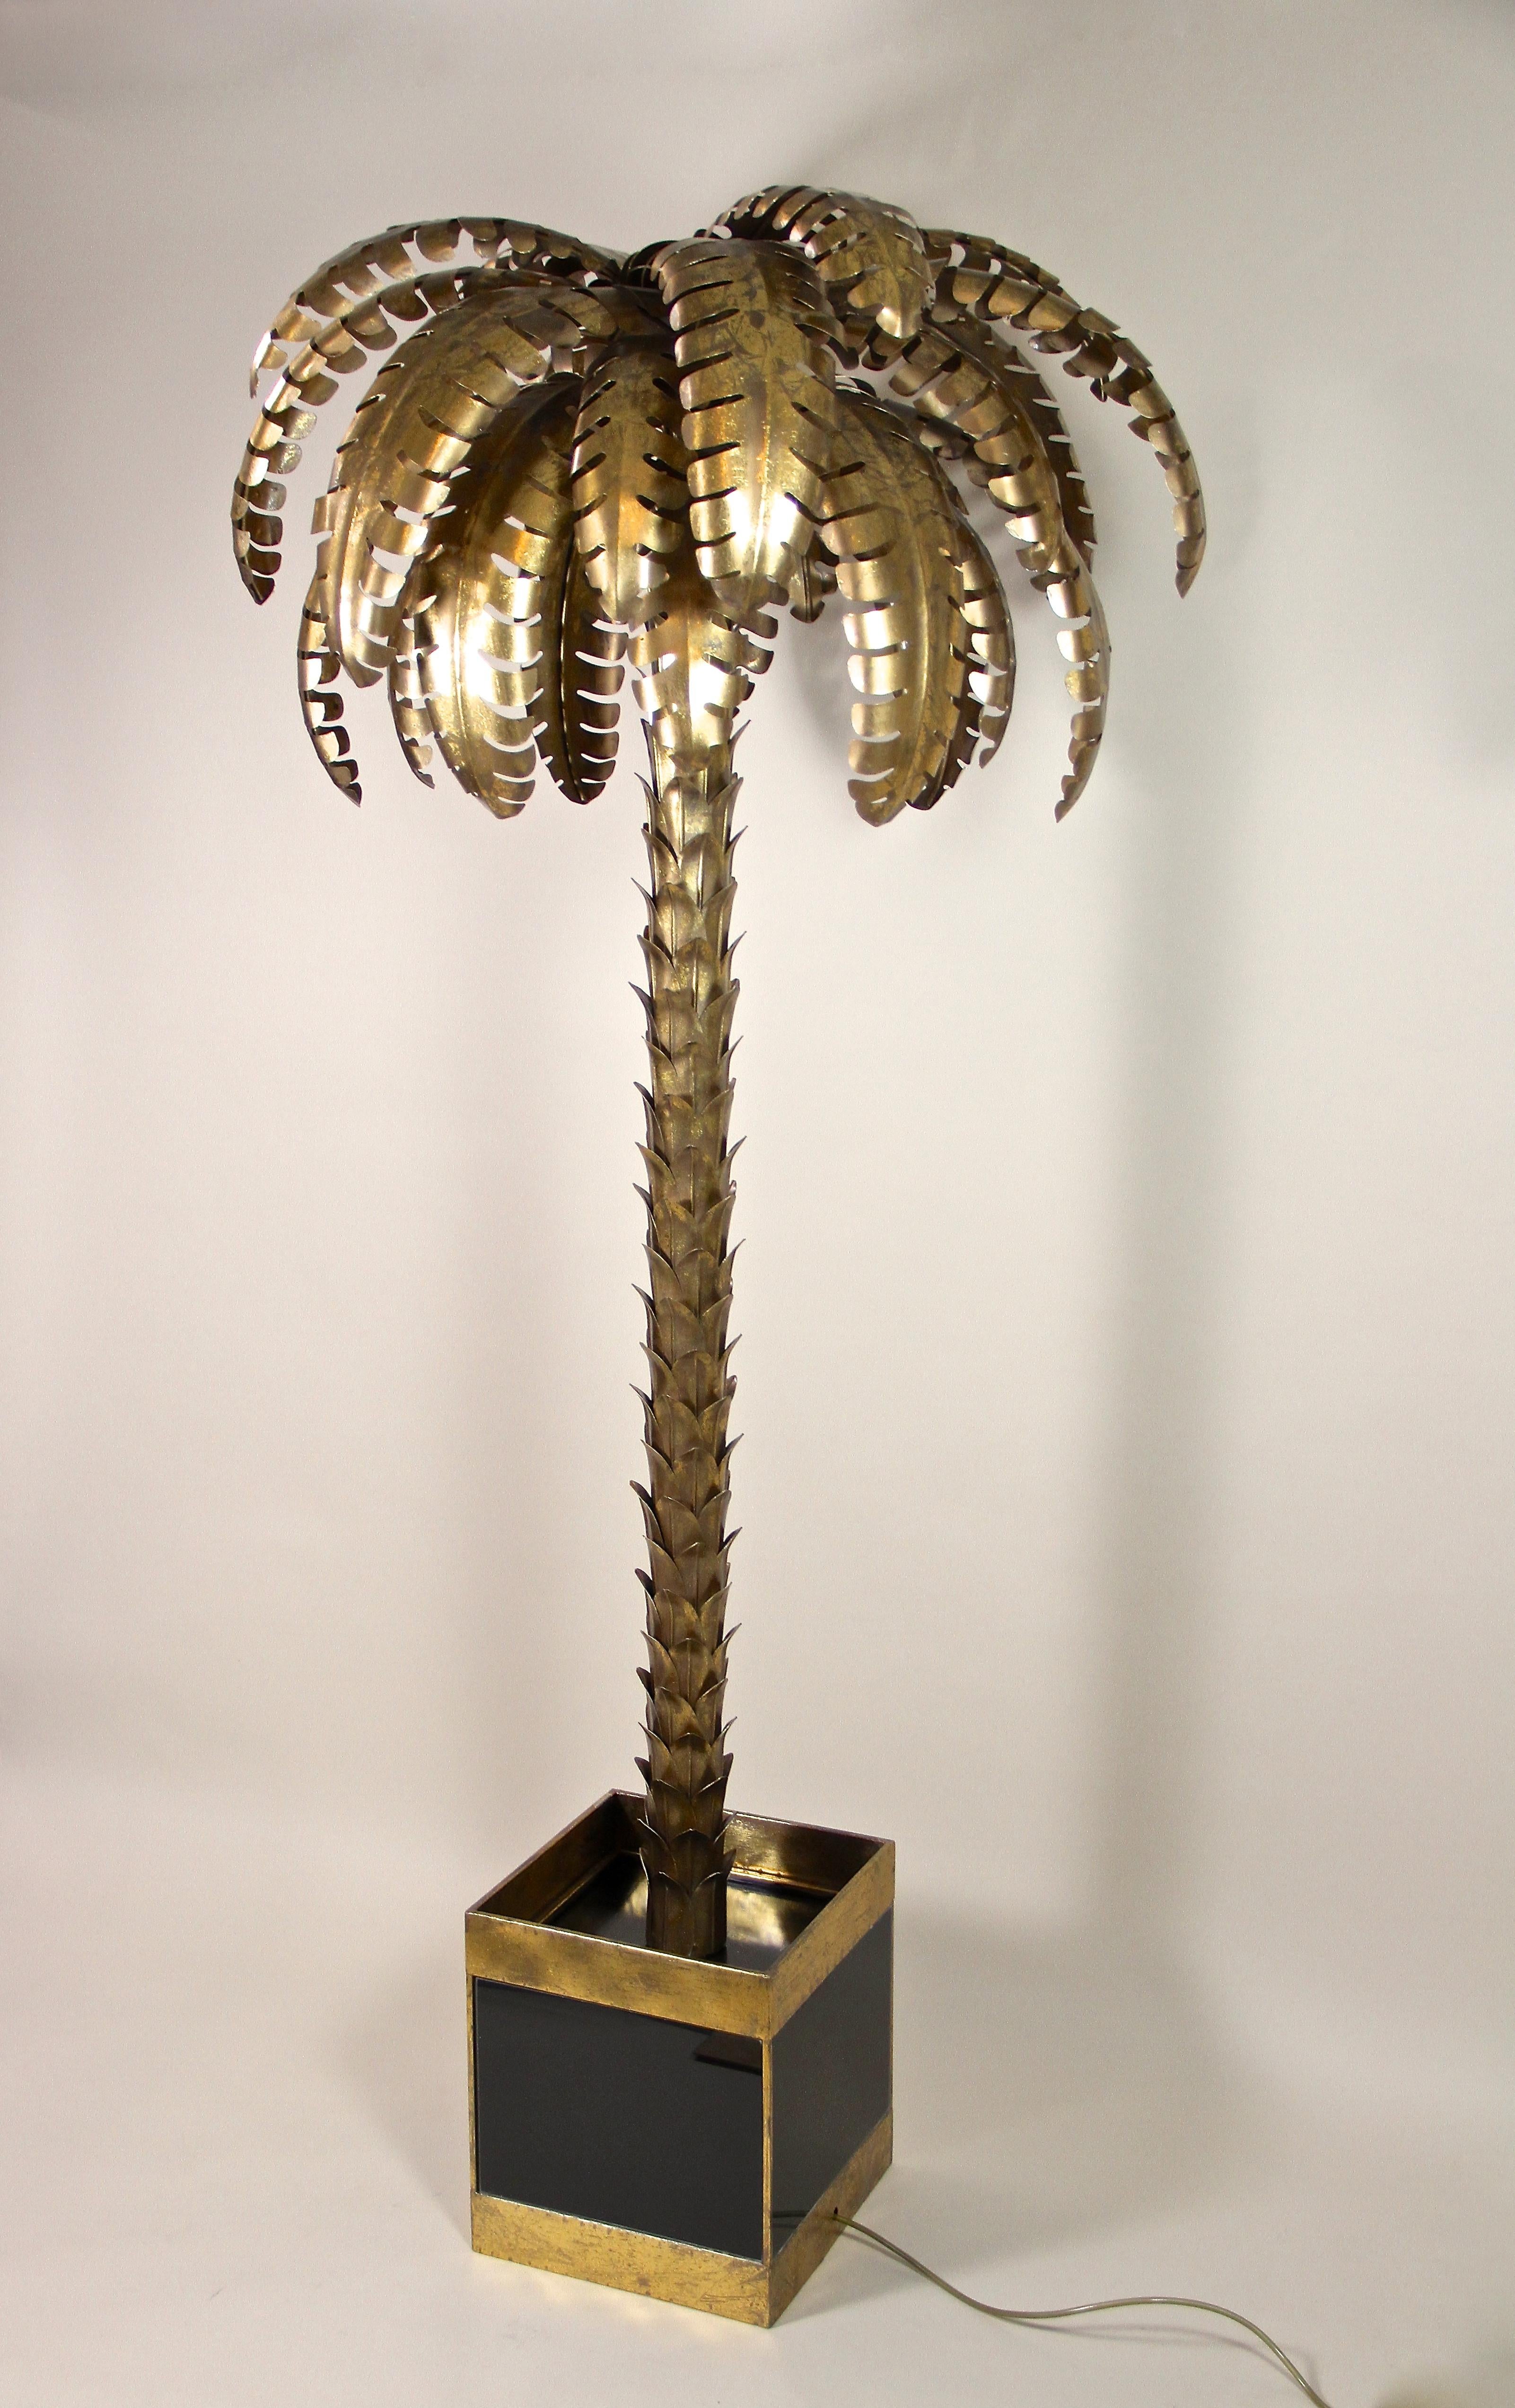 Remarkable rare Palm Tree Floor Lamp out of France attributed to Maison Jansen. Elaborately made out of brass in the 1970s, this artfully designed floor lamp is a true masterpiece. This matchless Hollywood Regency style floor lamp impresses with an